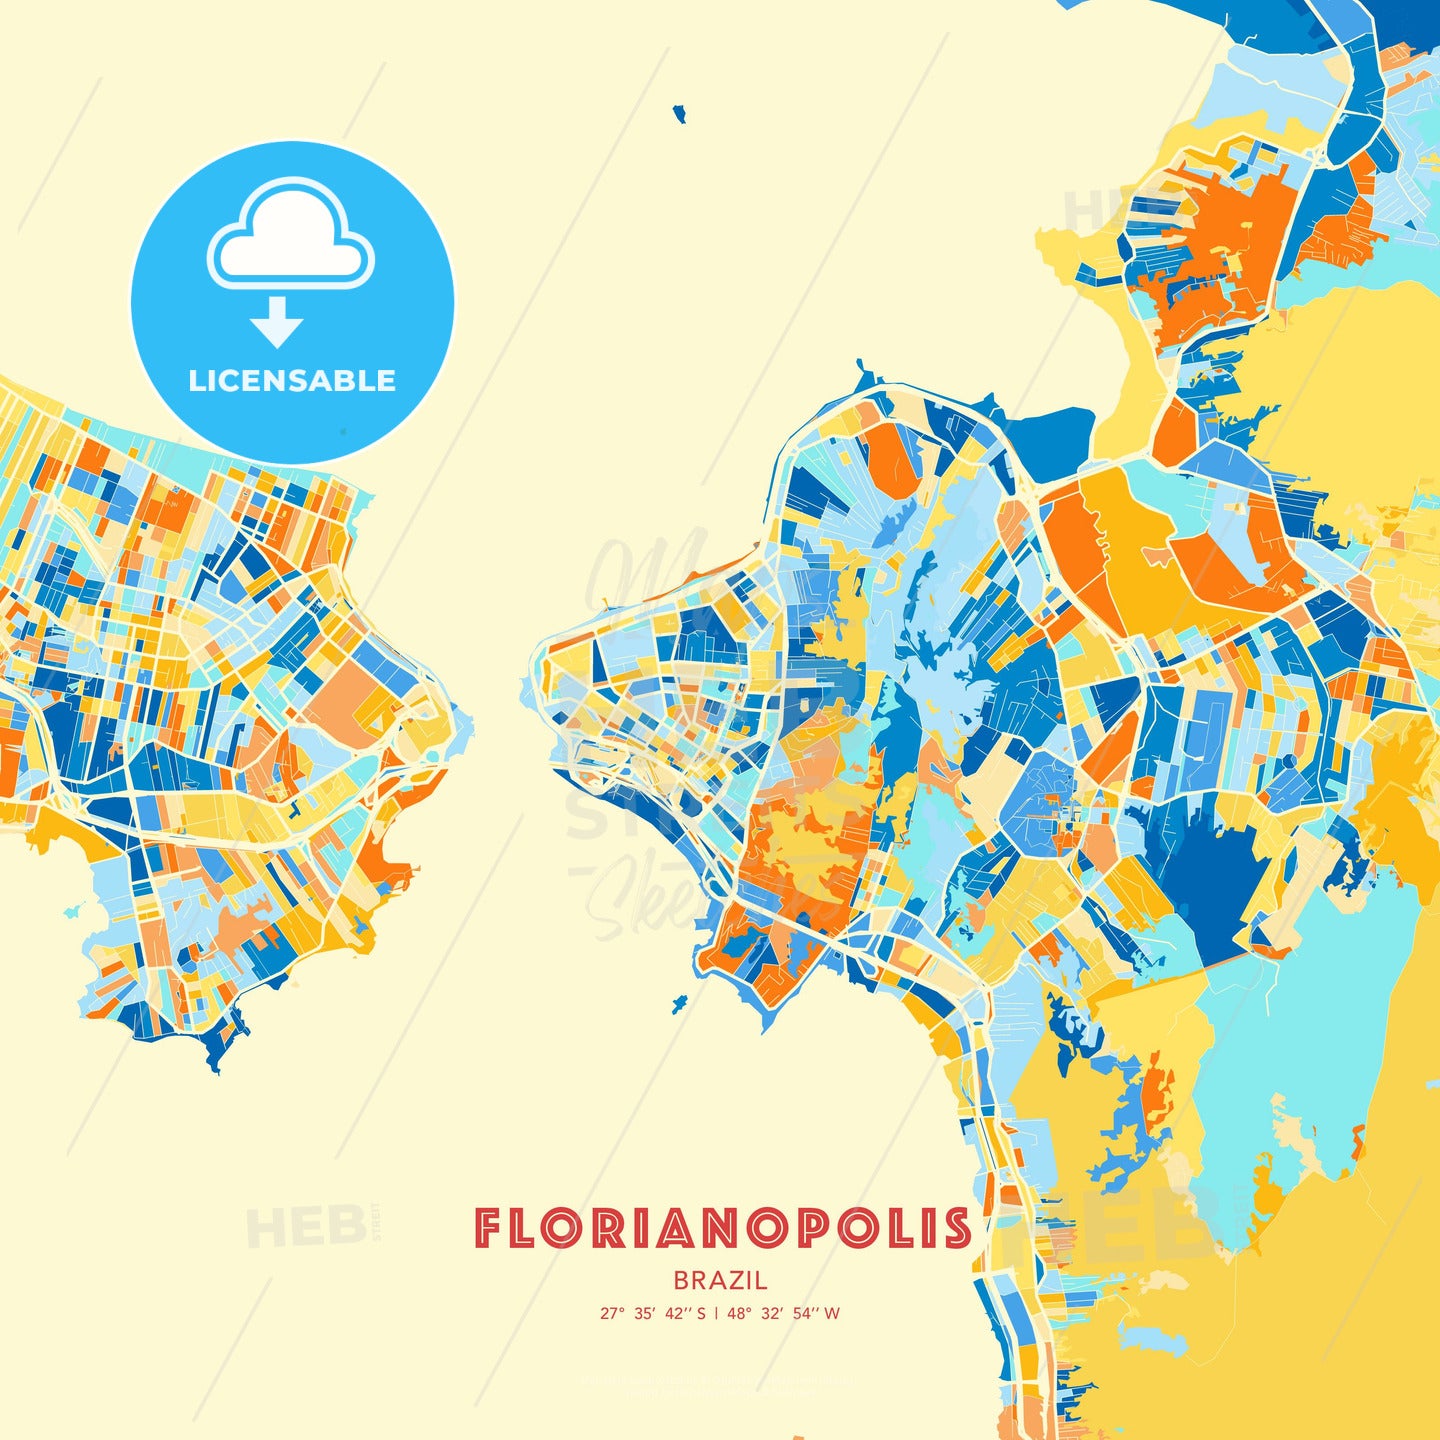 Florianopolis, Brazil, map - HEBSTREITS Sketches